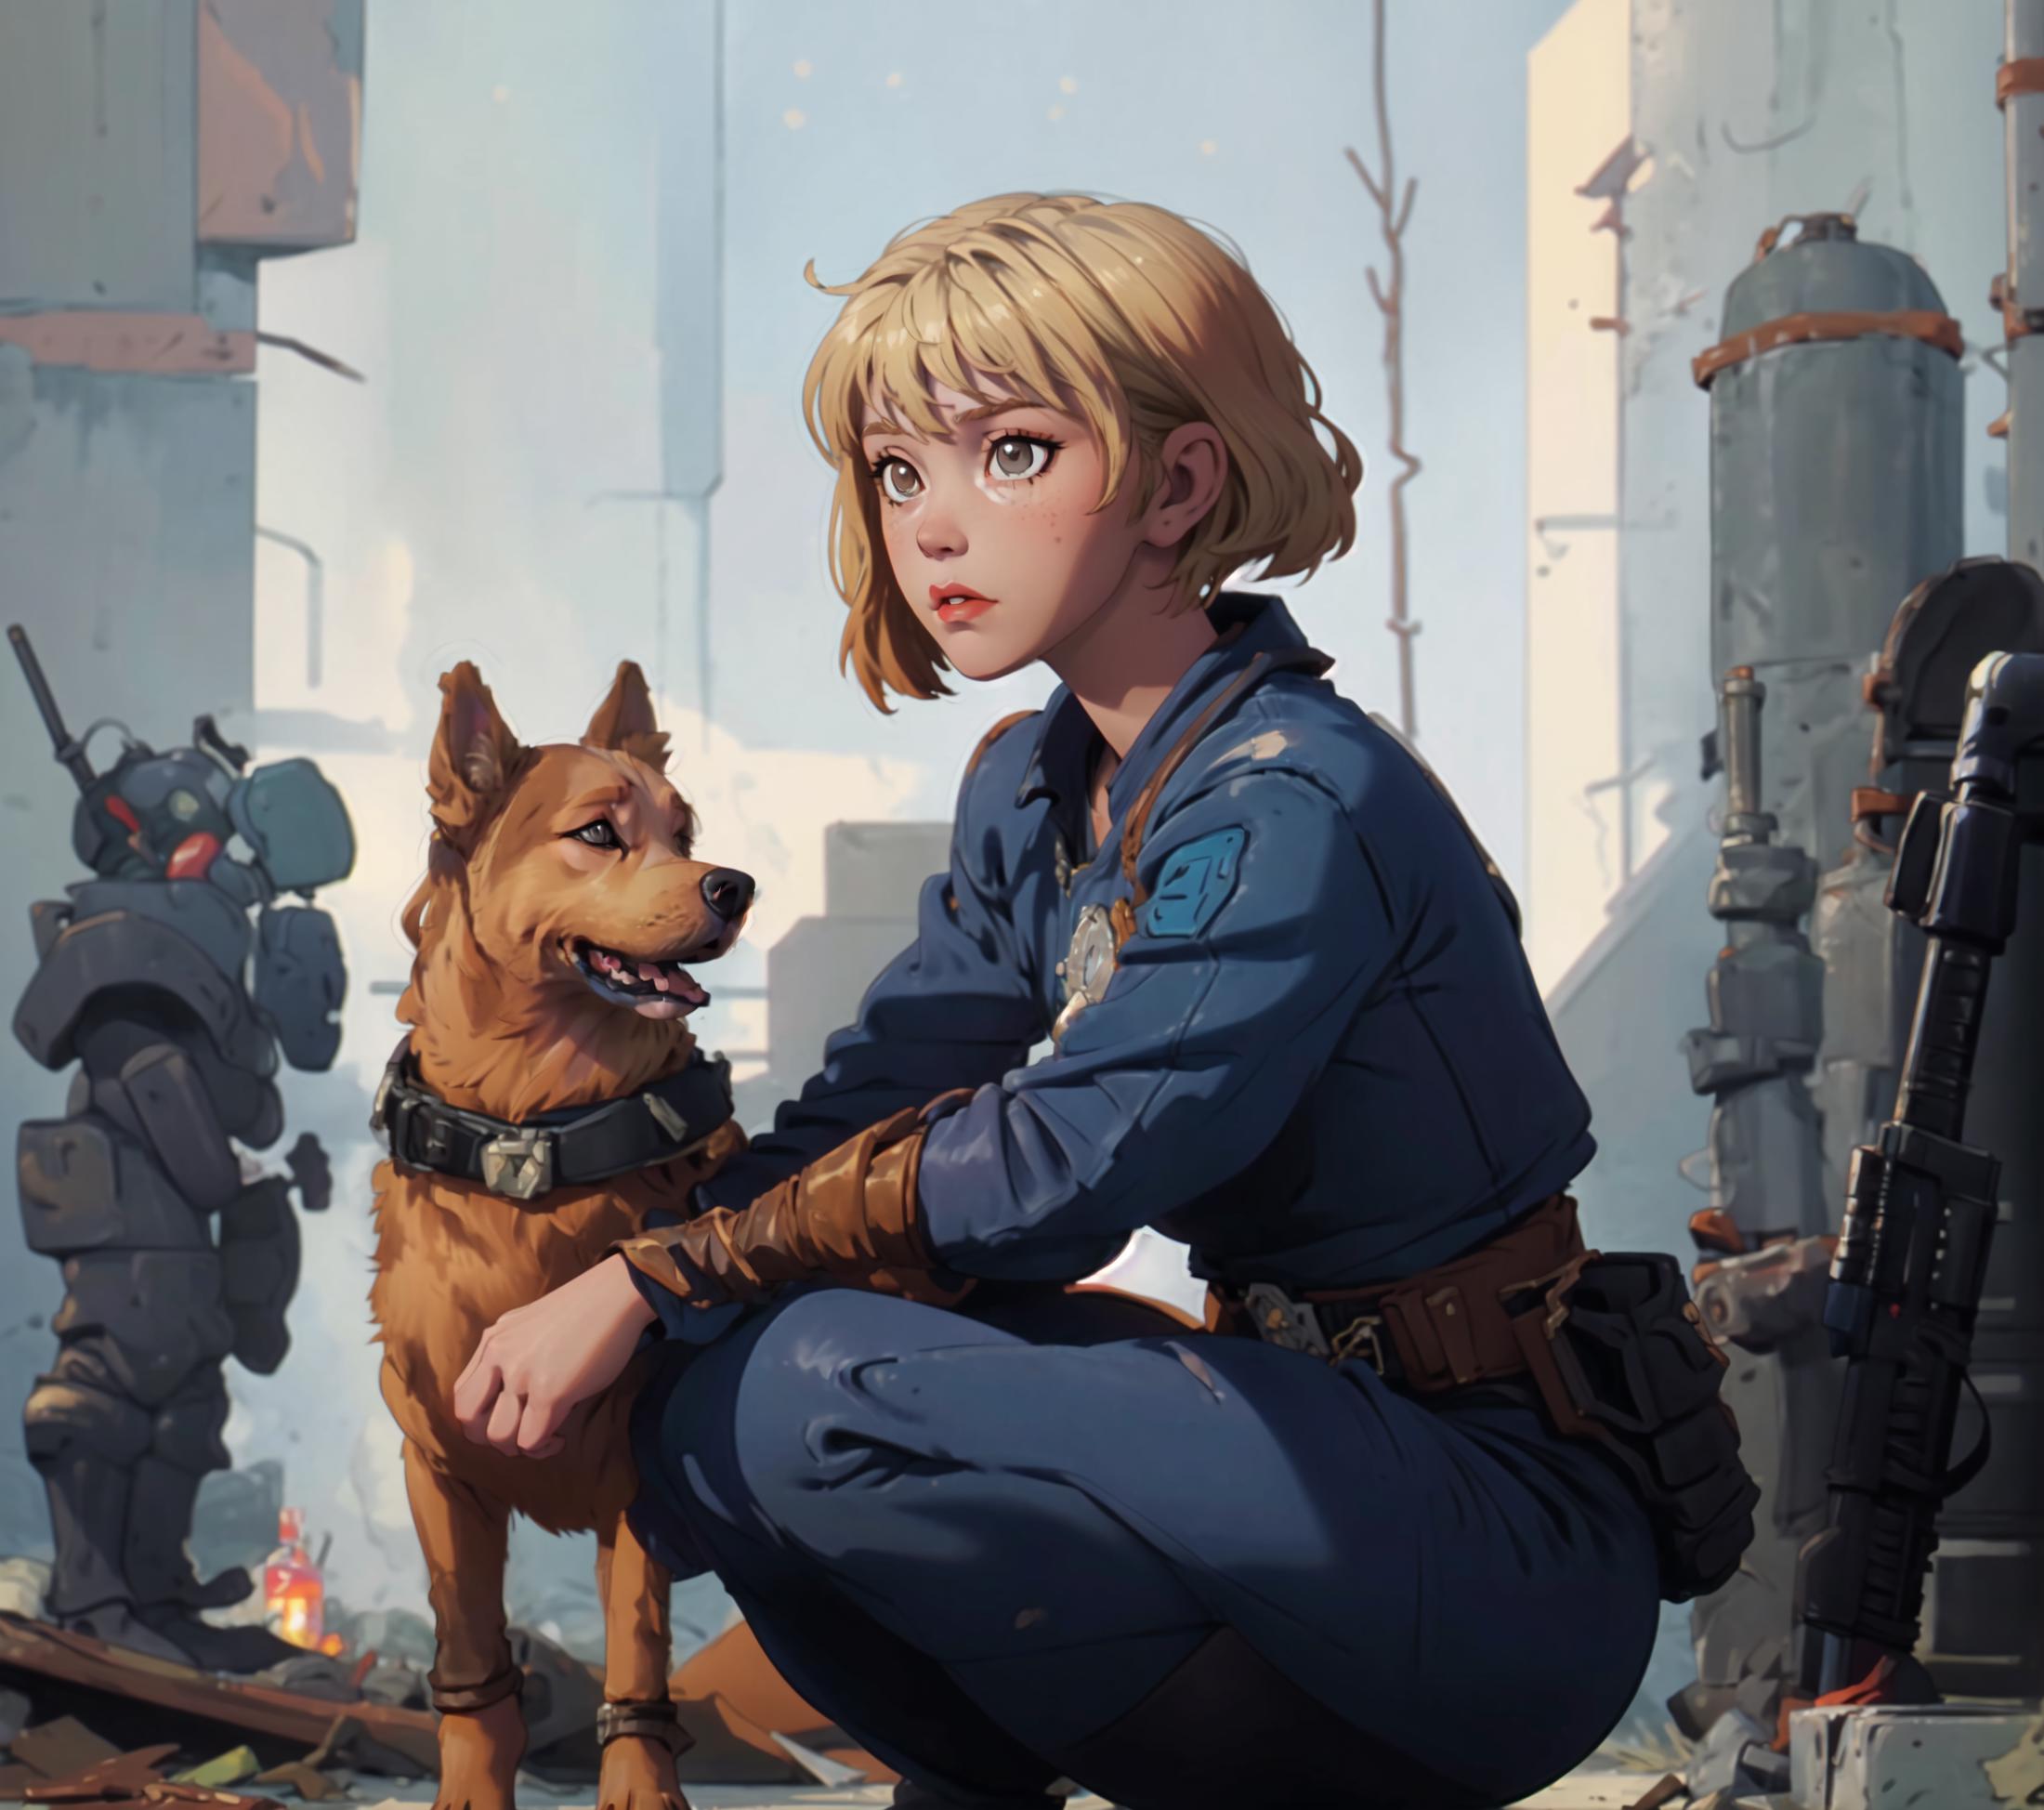 A woman with blonde hair holding a brown dog in a blue jumpsuit.